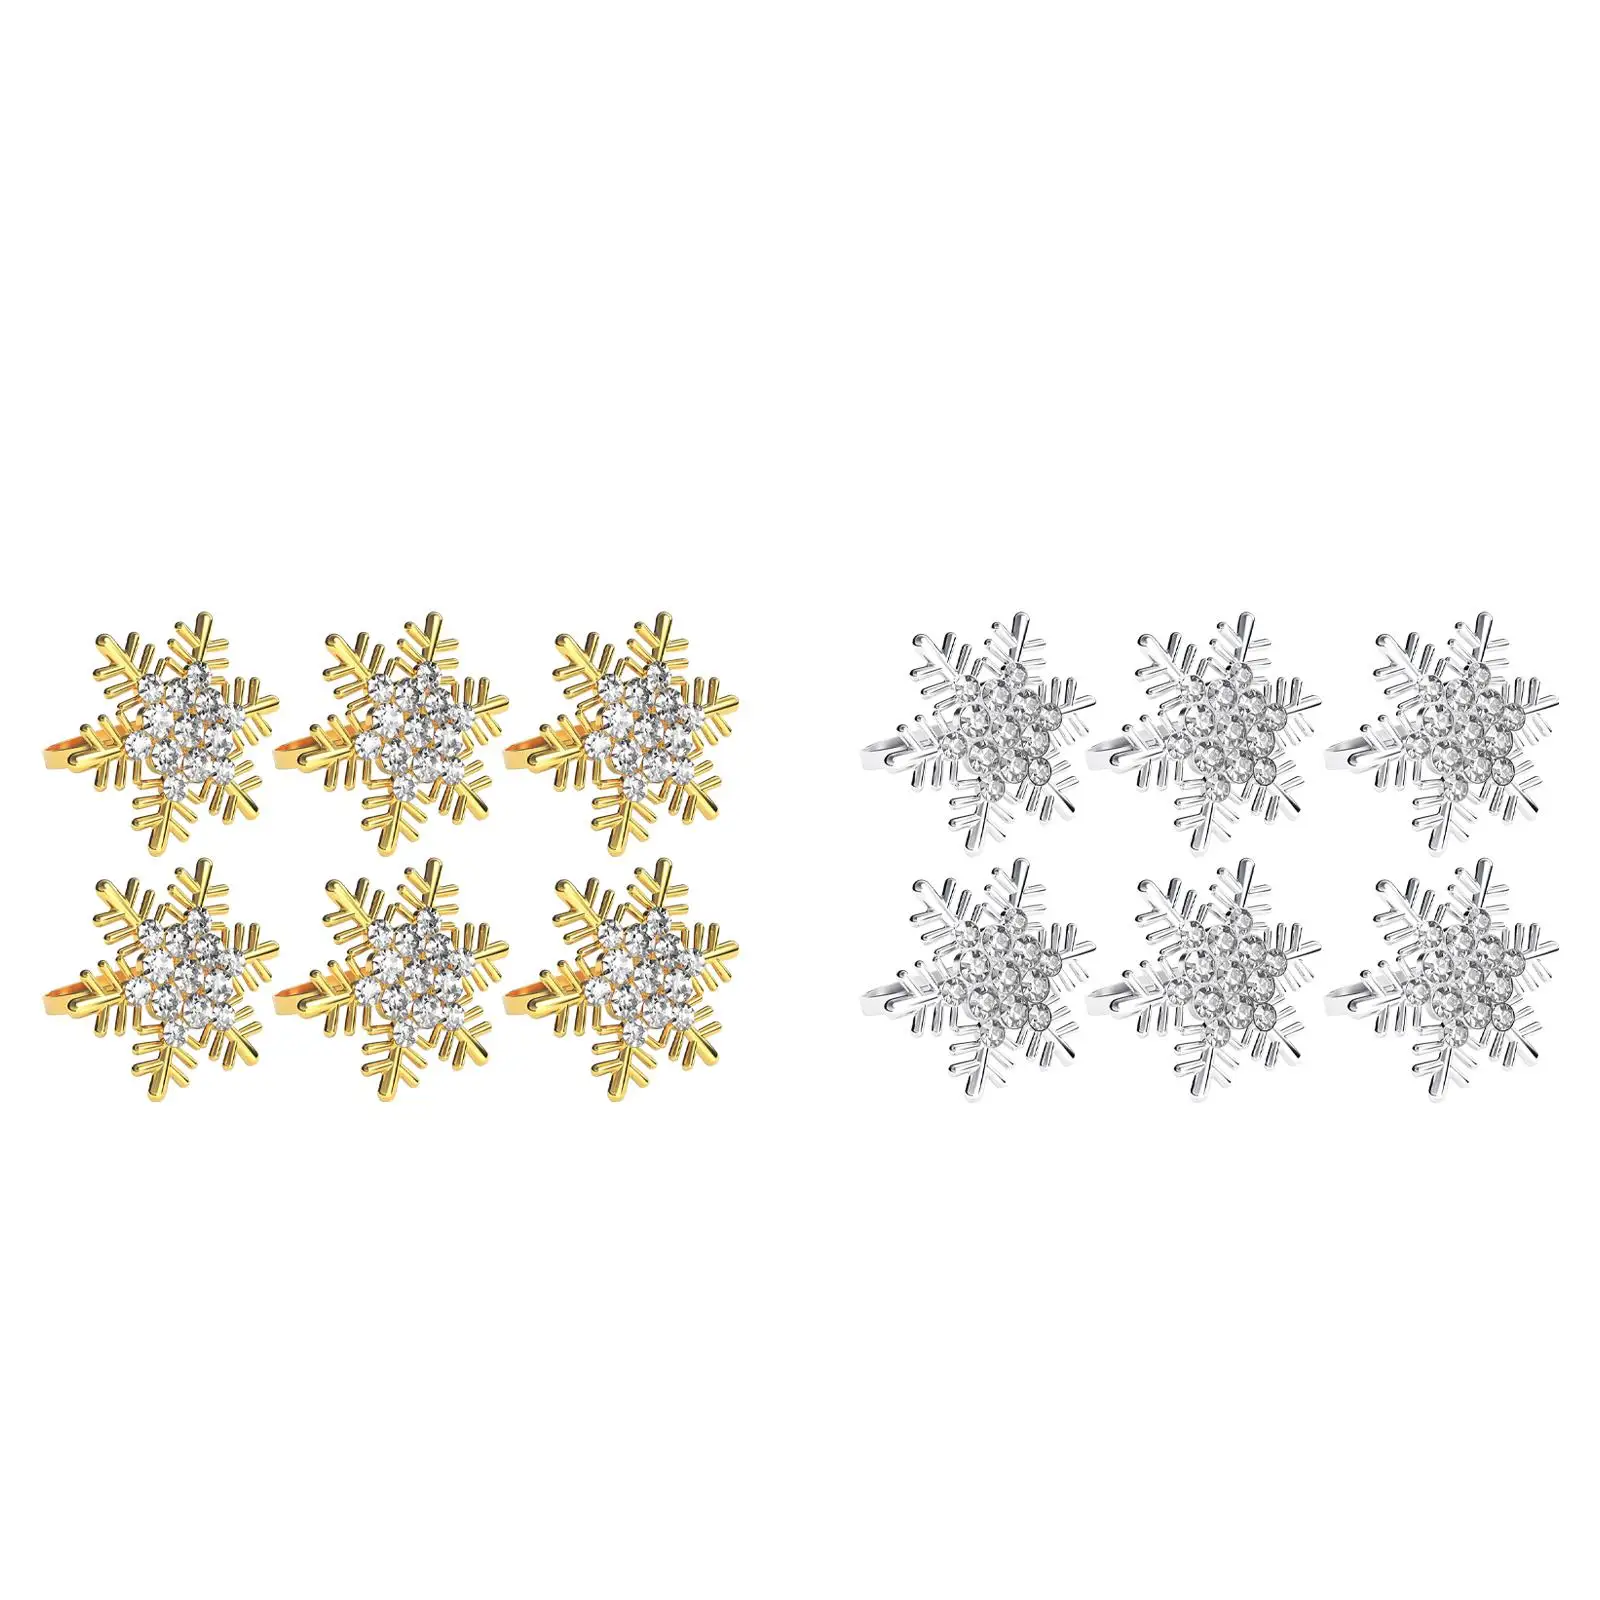 6 Pieces Xmas Snowflake Napkin Rings Household Napkin Buckle Napkin Holders for Party Banquet Wedding Christmas Thanksgiving